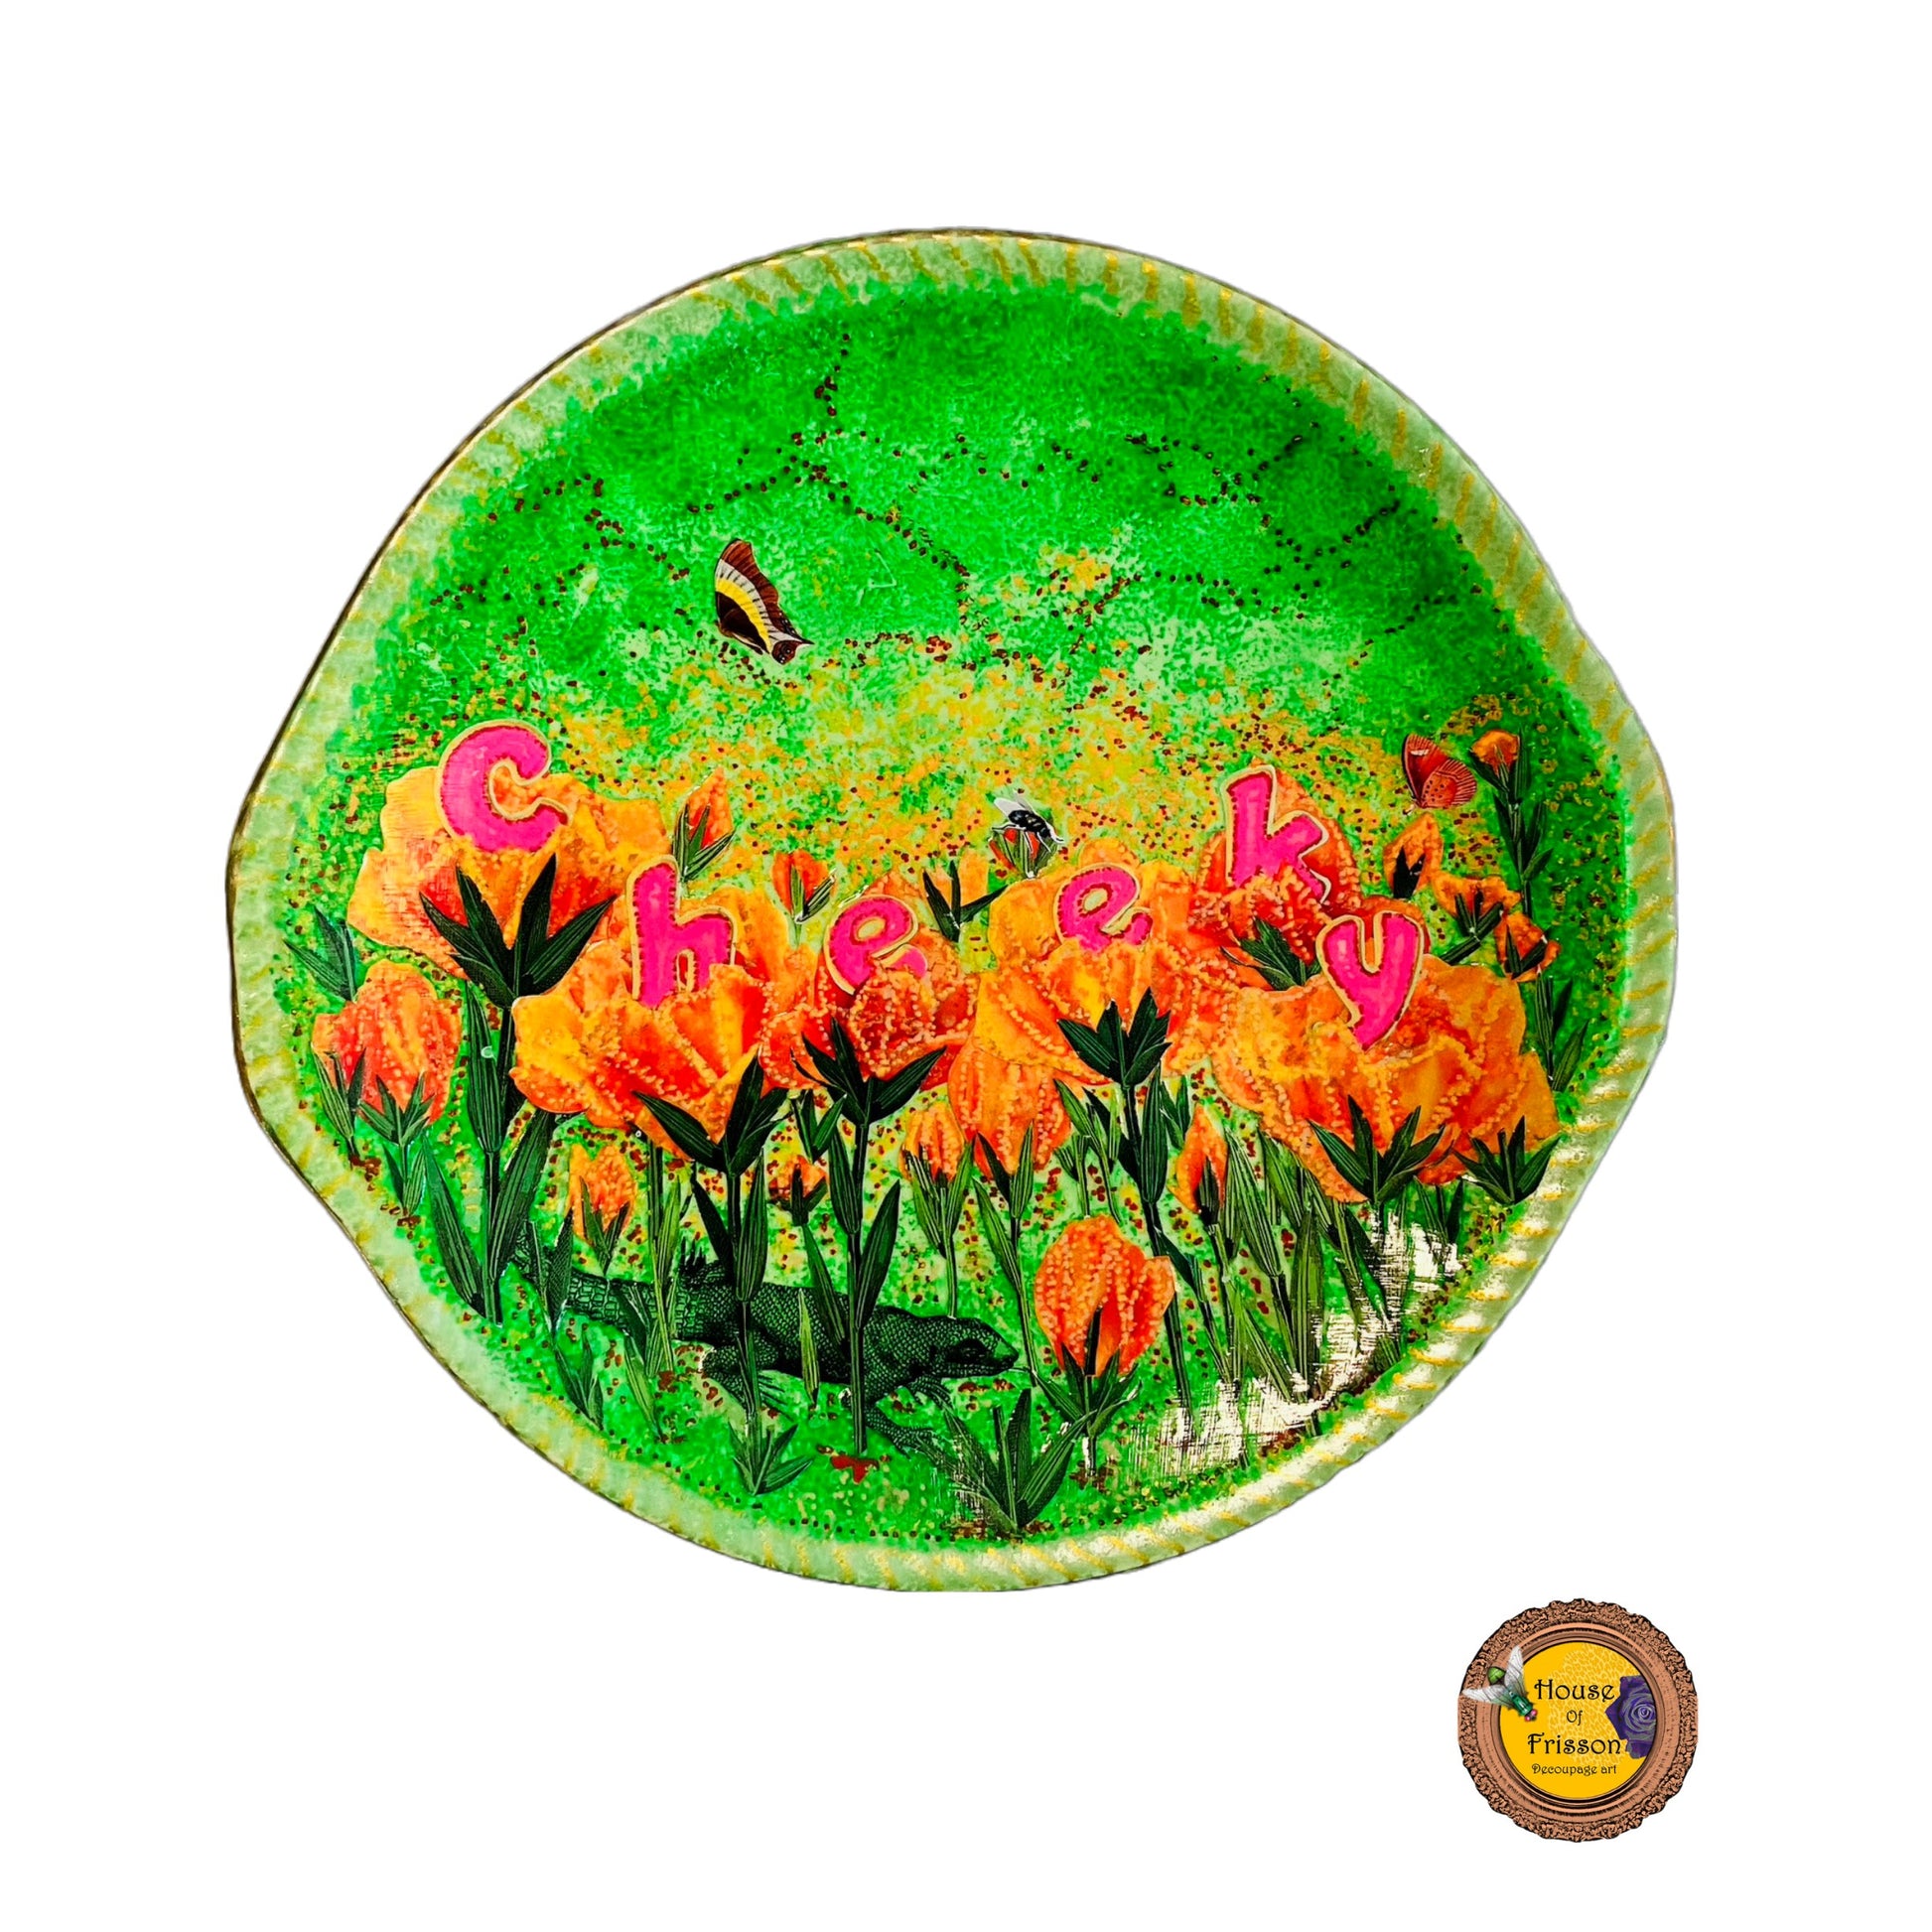 "Cheeky" Wall Plate by House of Frisson, featuring a collage with letters coming out of flowers forming the word "cheeky", and a lizard, on a green background.